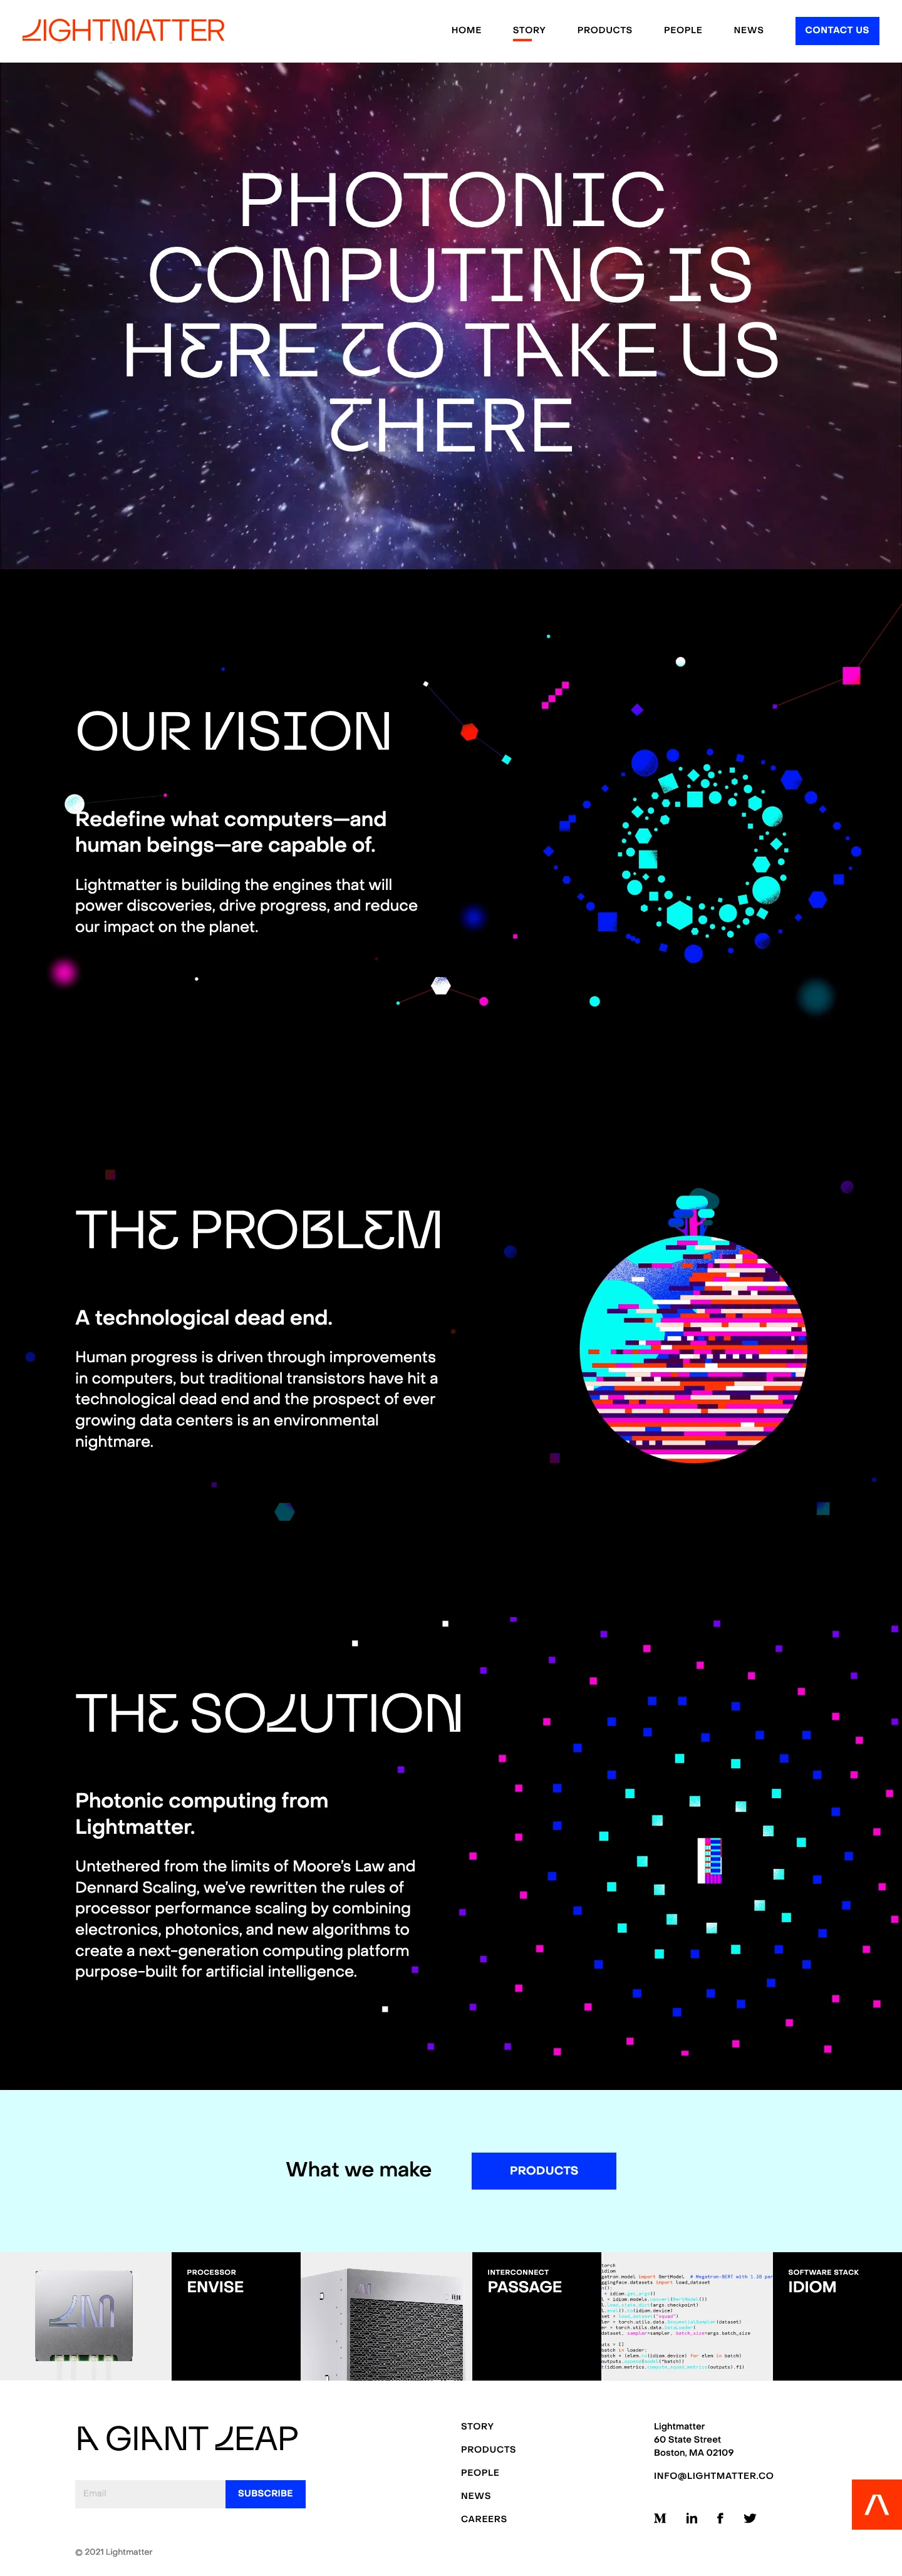 Lightmatter Landing Page Example: We’ve created a photonic processor and interconnect that are faster, more efficient, and cooler than anything else on earth (or anything ever experienced before) to power the next giant leaps in human progress.